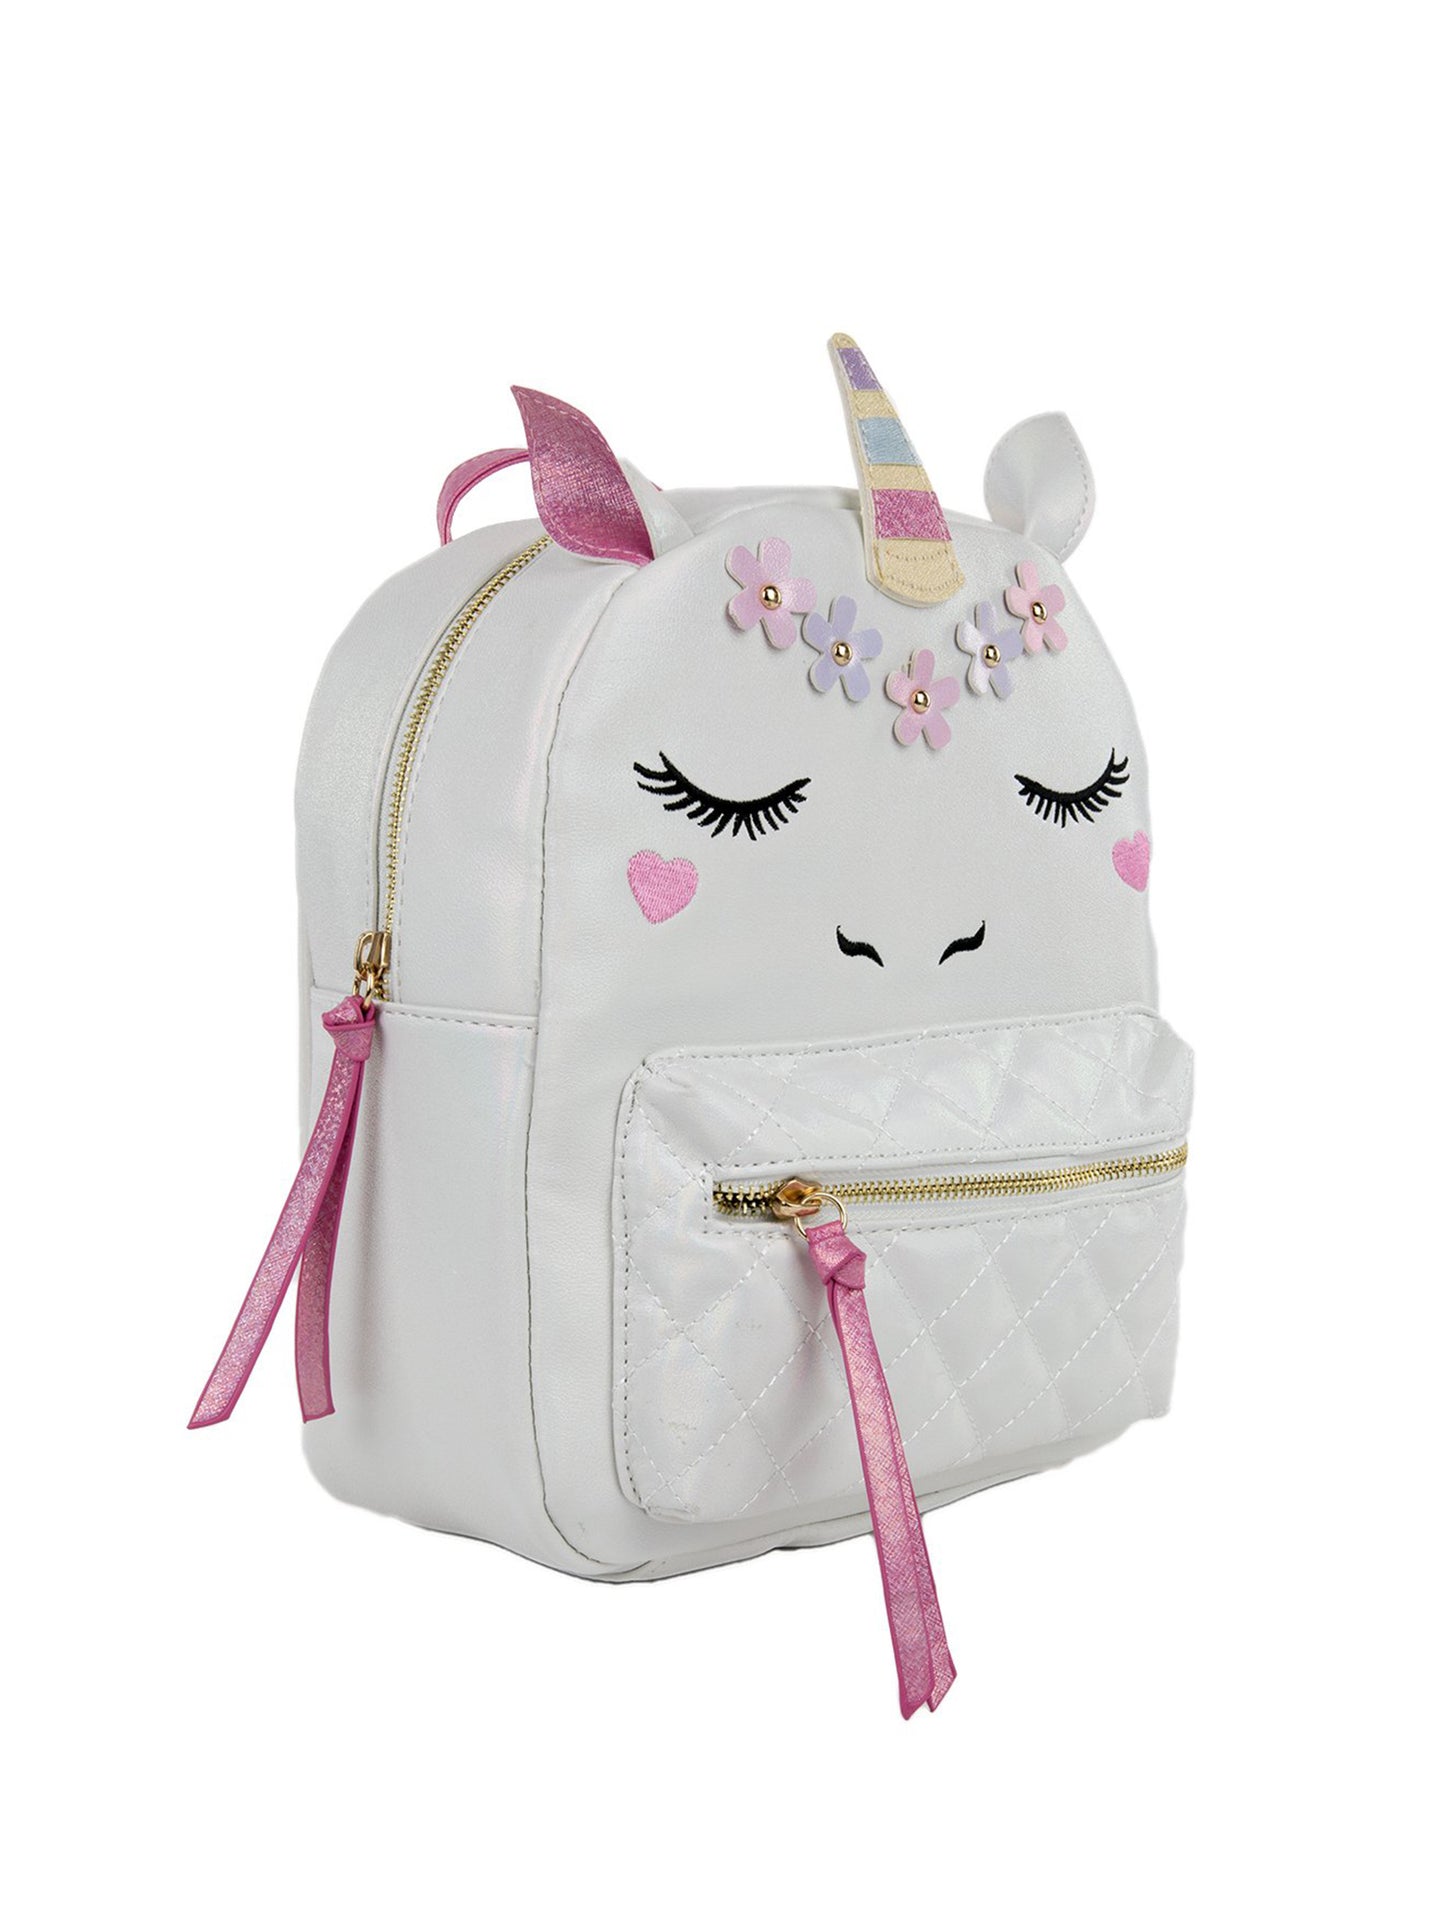 Under One Sky Unicorn Sequin Backpack - Shop Backpacks at H-E-B